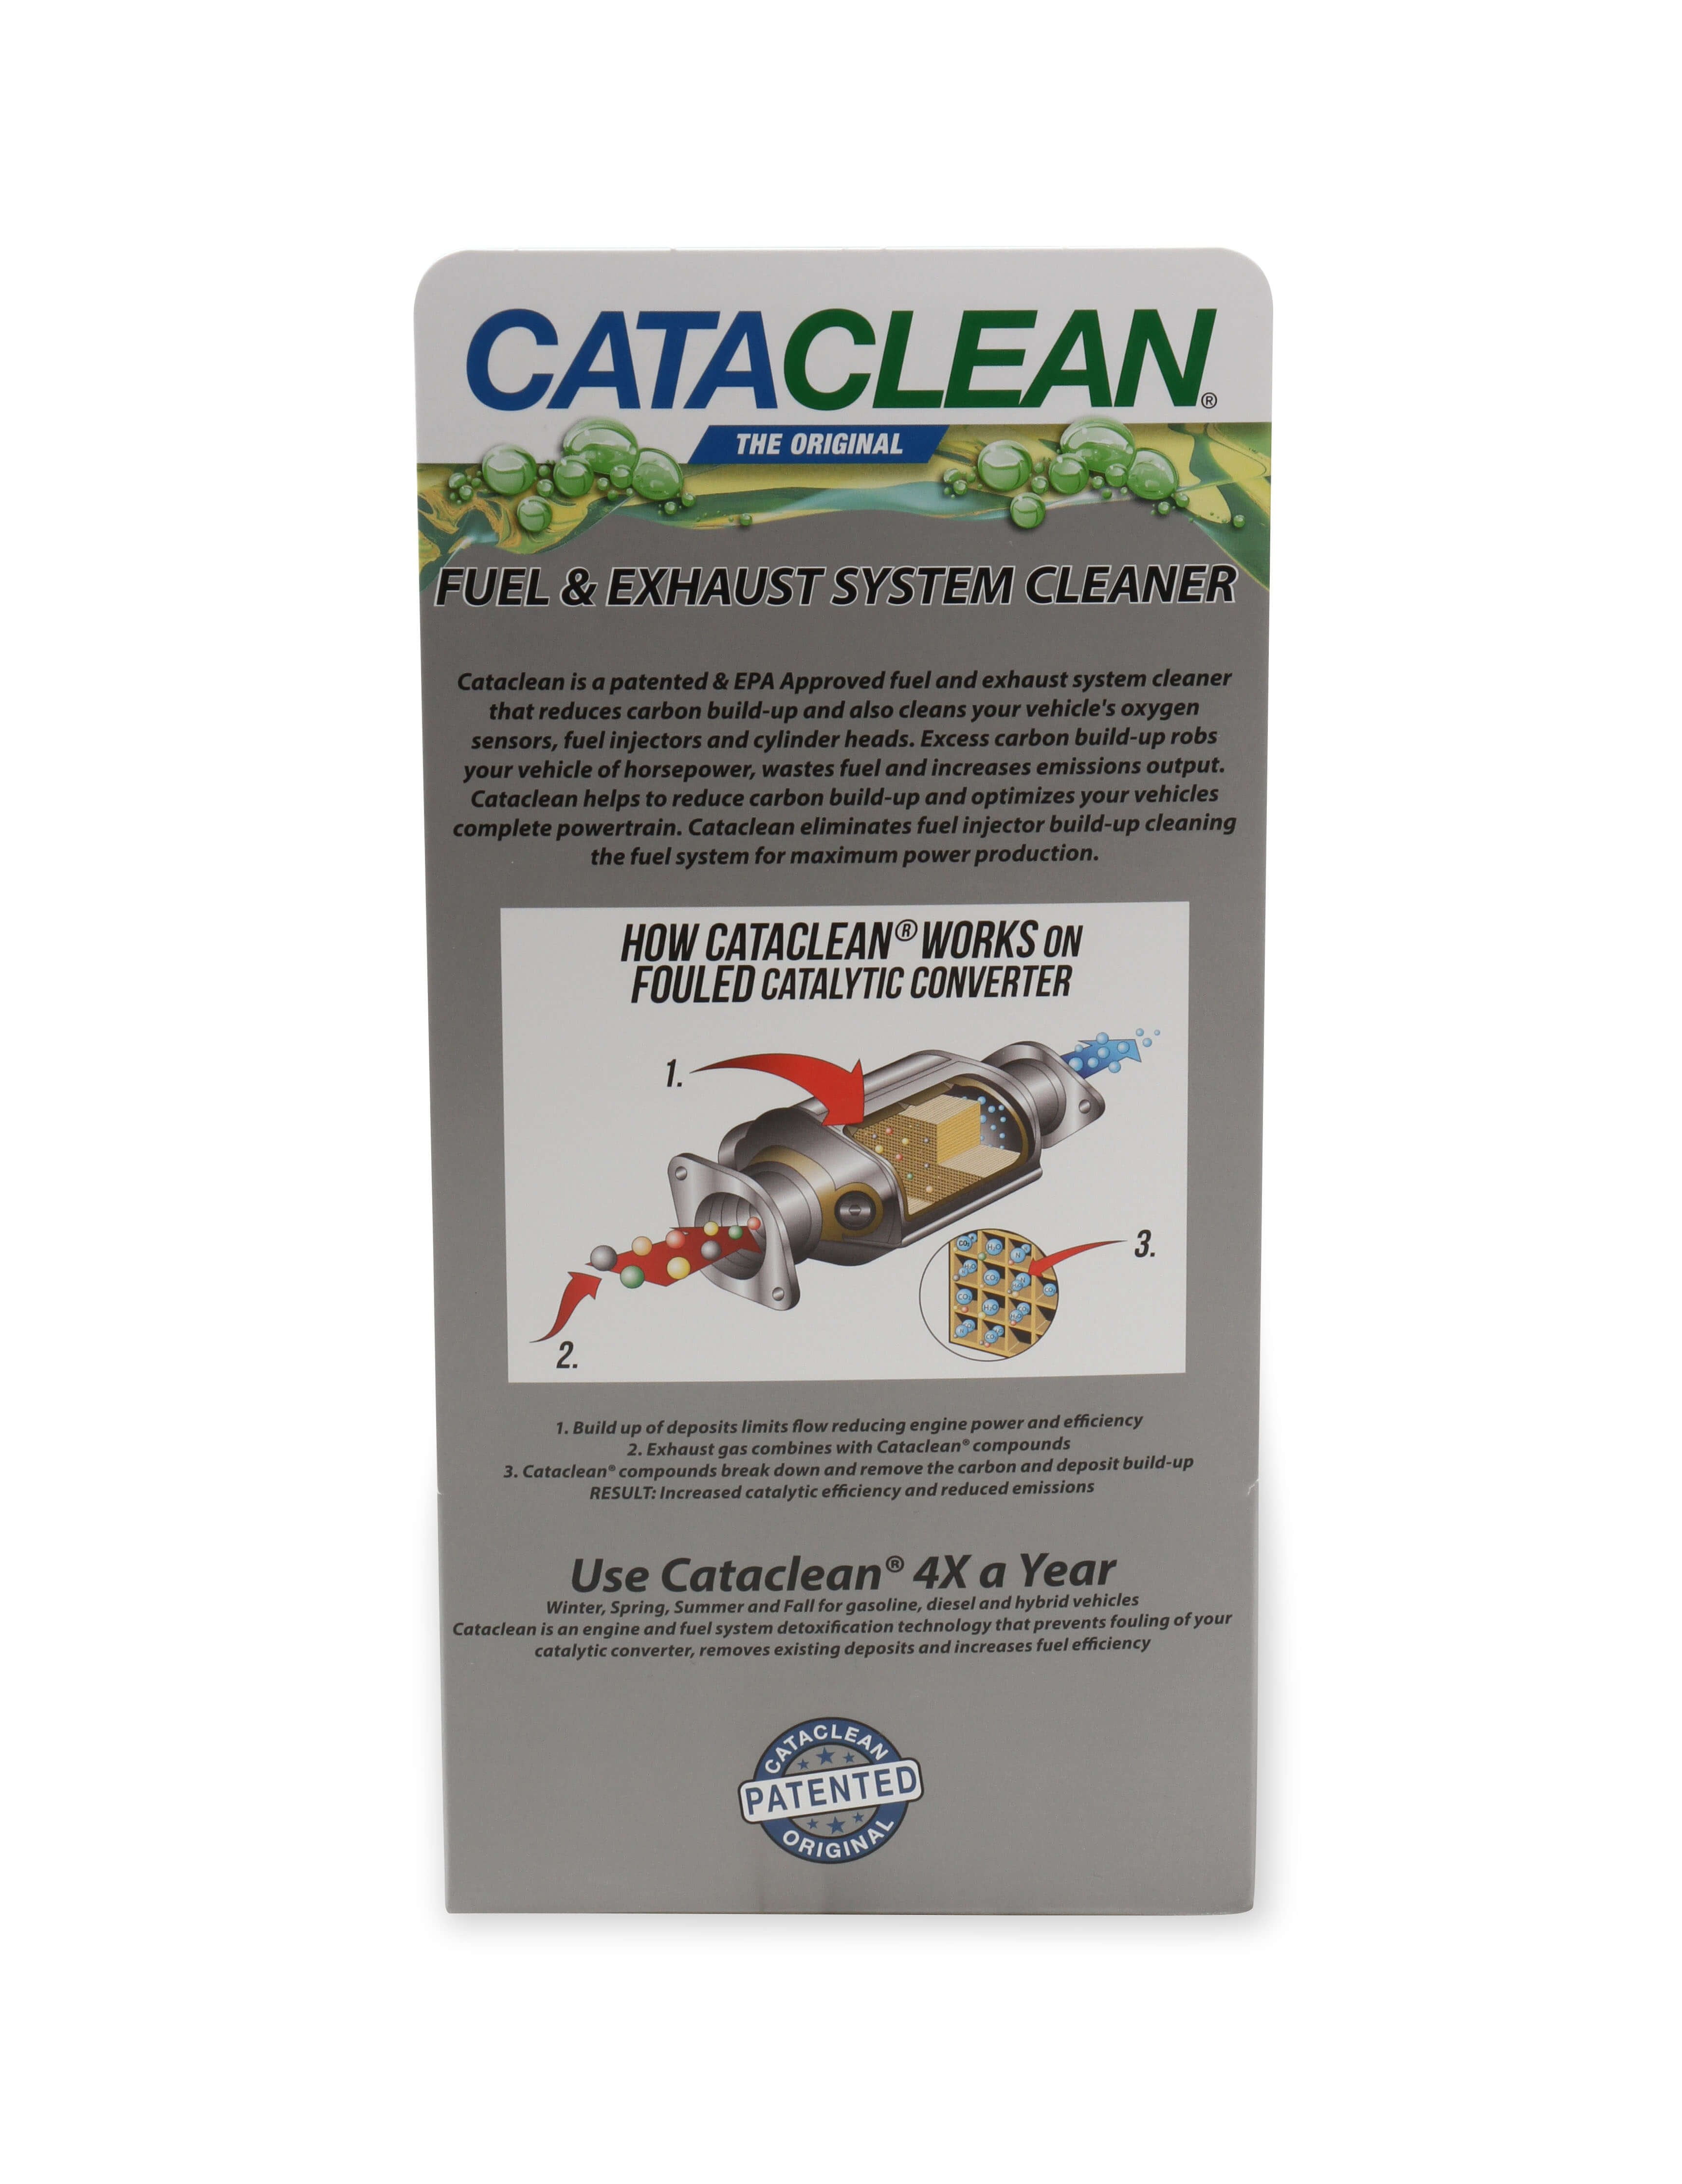 Cataclean Revs Up USA Sales